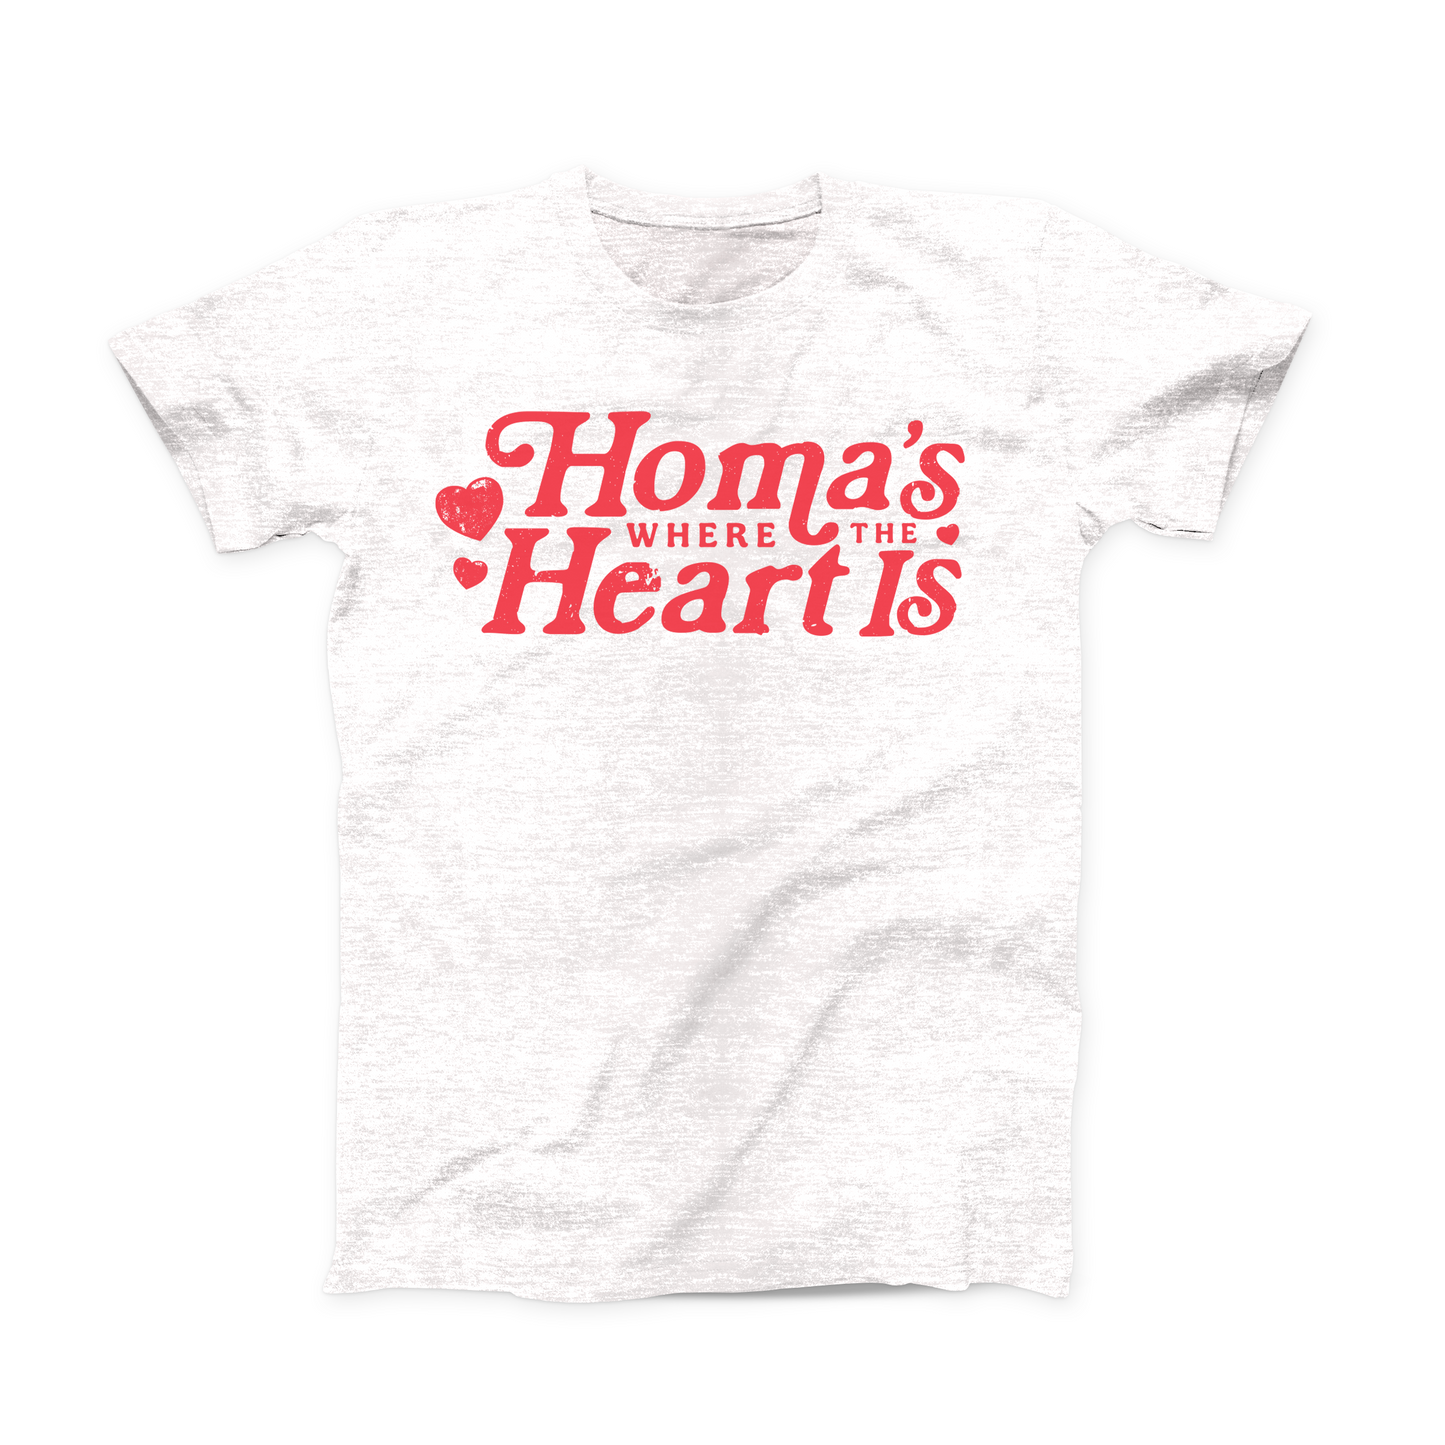 Ash colored Oklahoma T-shirt. "Homa's WHERE THE Heart Is" listed in red font across the chest with 3 hearts of varying sizes beside the words. "Where the" is shown smaller, sandwiched in the middle of the rest of the phrase.